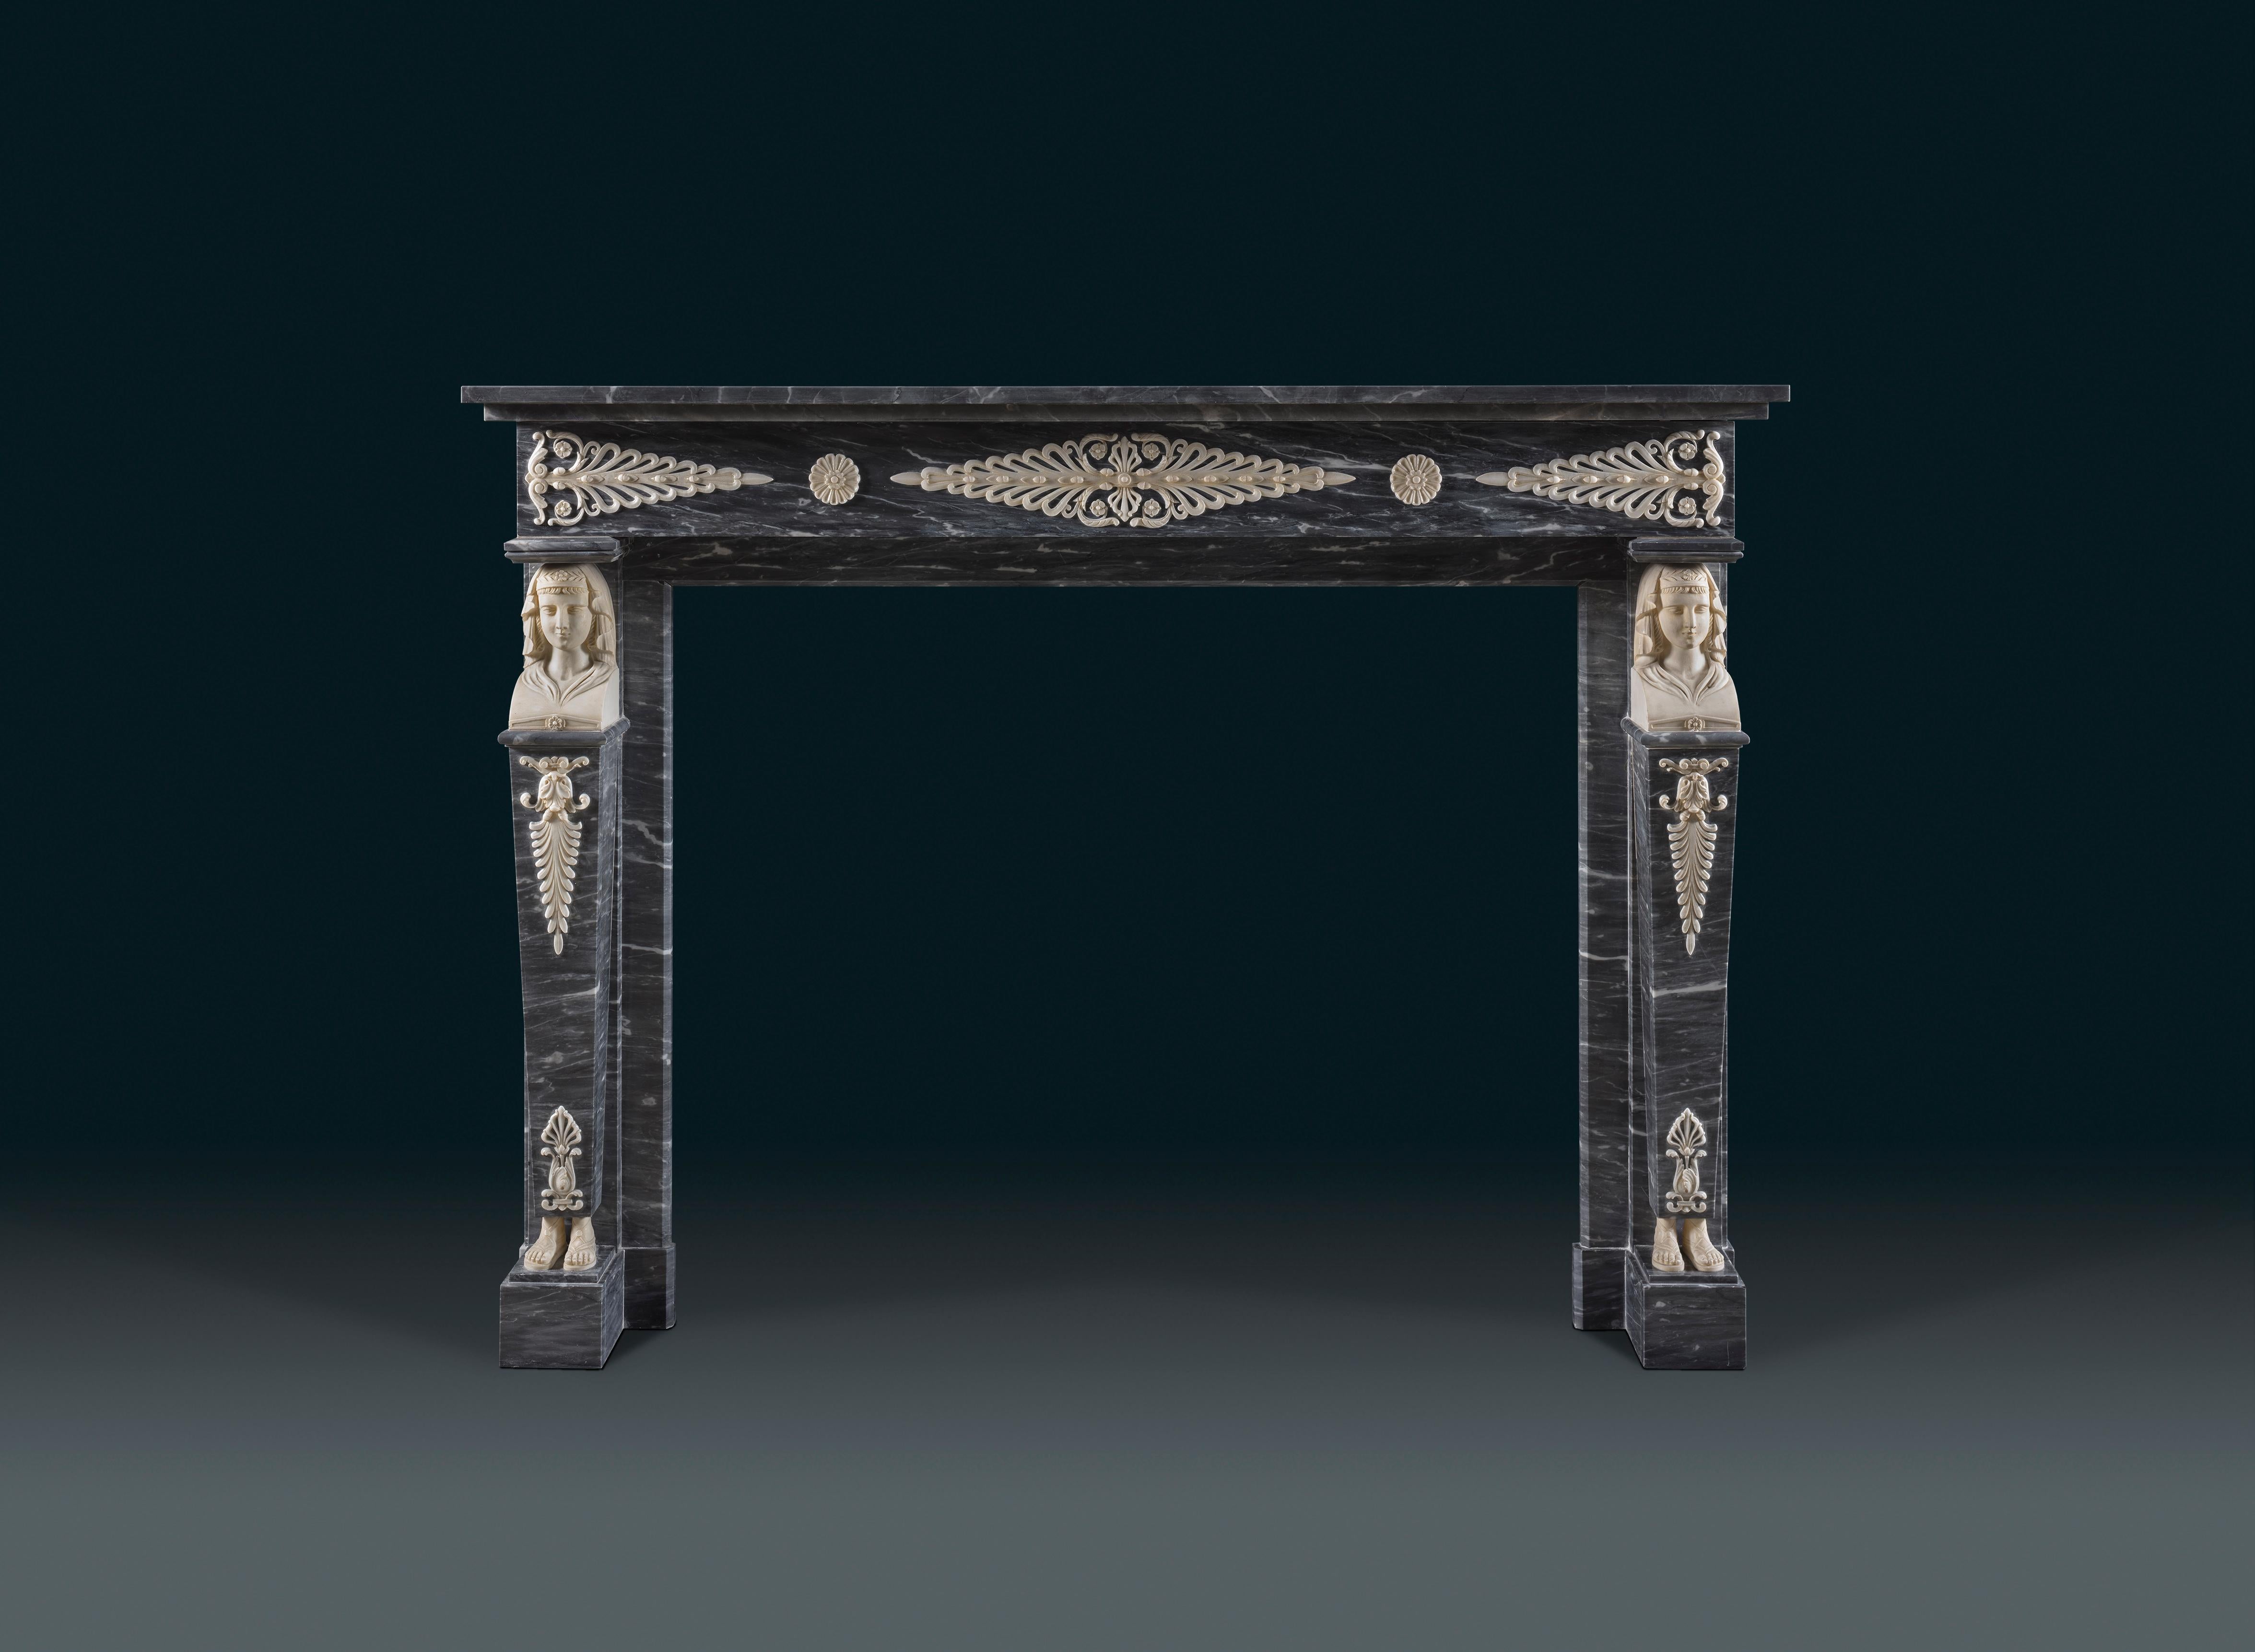 Egyptian Revival A French 1820’s chimneypiece carved in Bardiglio and statuary marble For Sale